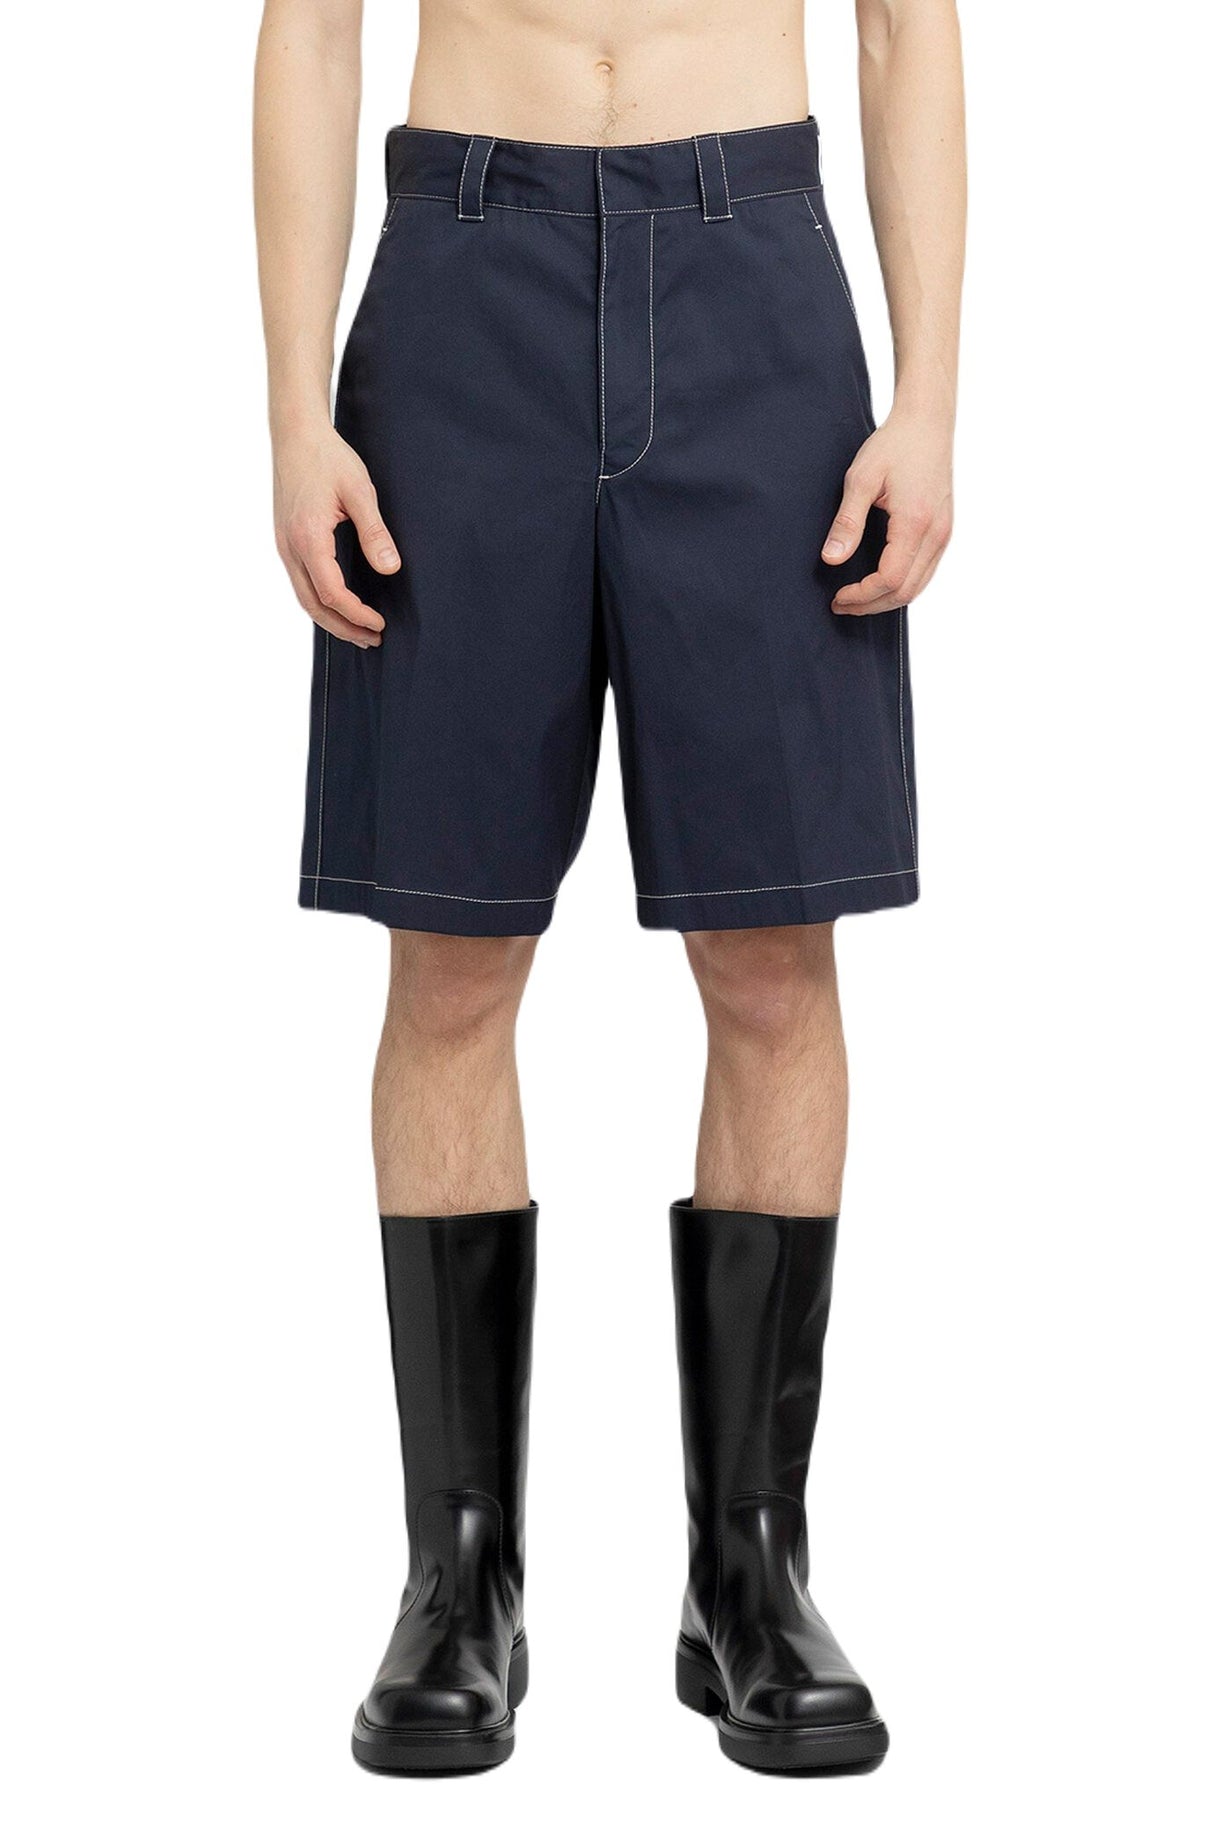 Men's Short Pants from Bluecalc (SS23 Collection)